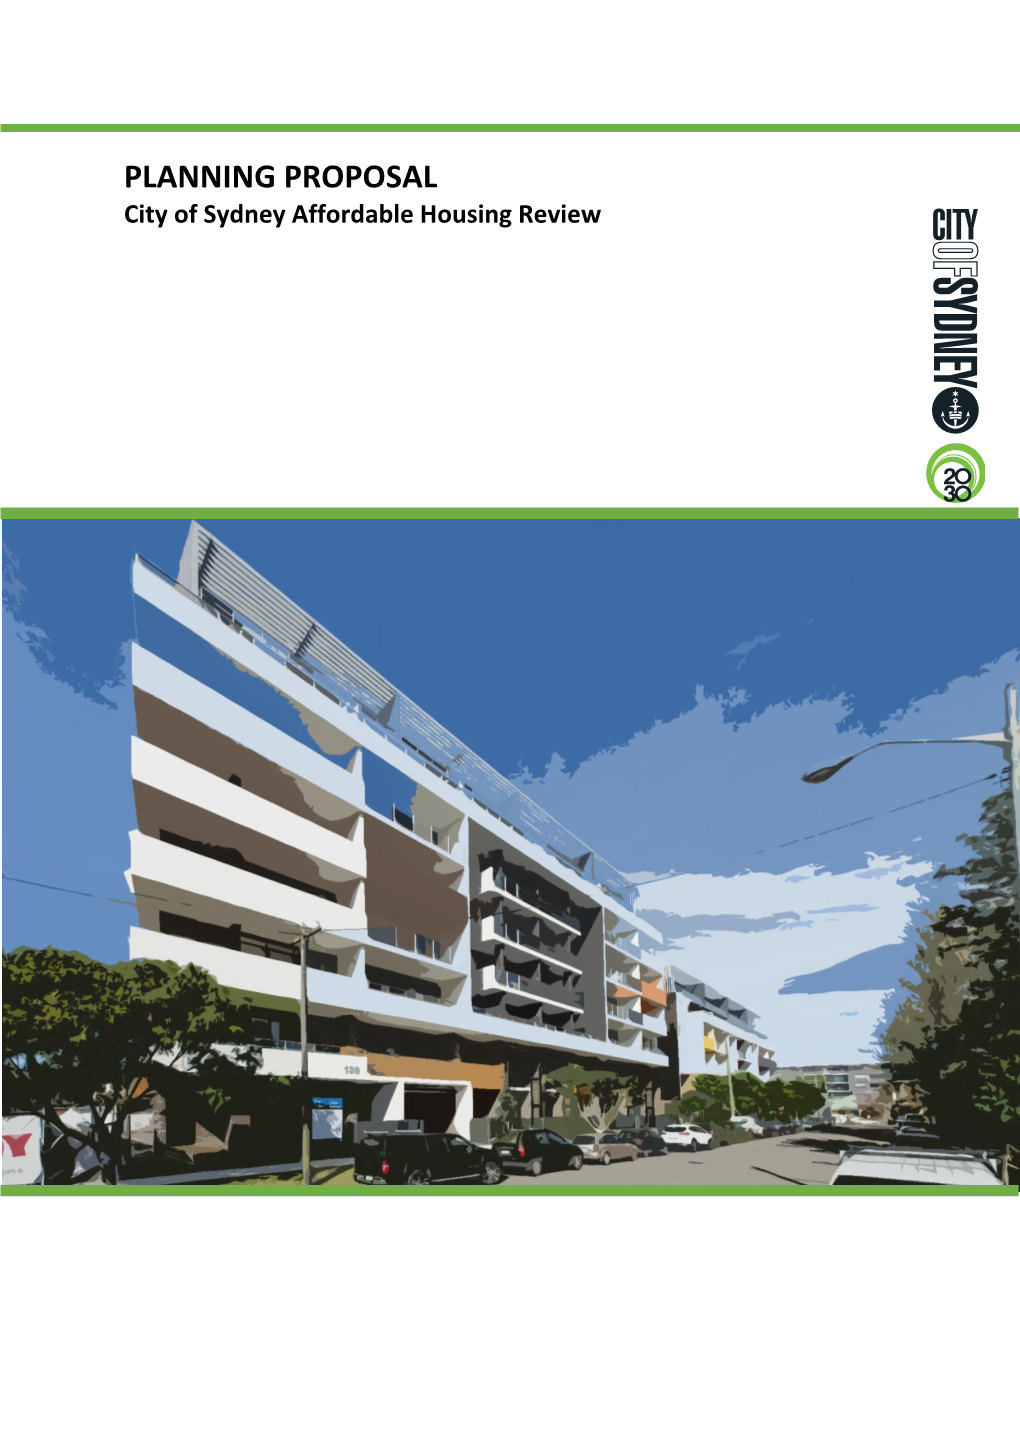 Planning Proposal – City of Sydney Affordable Housing Review